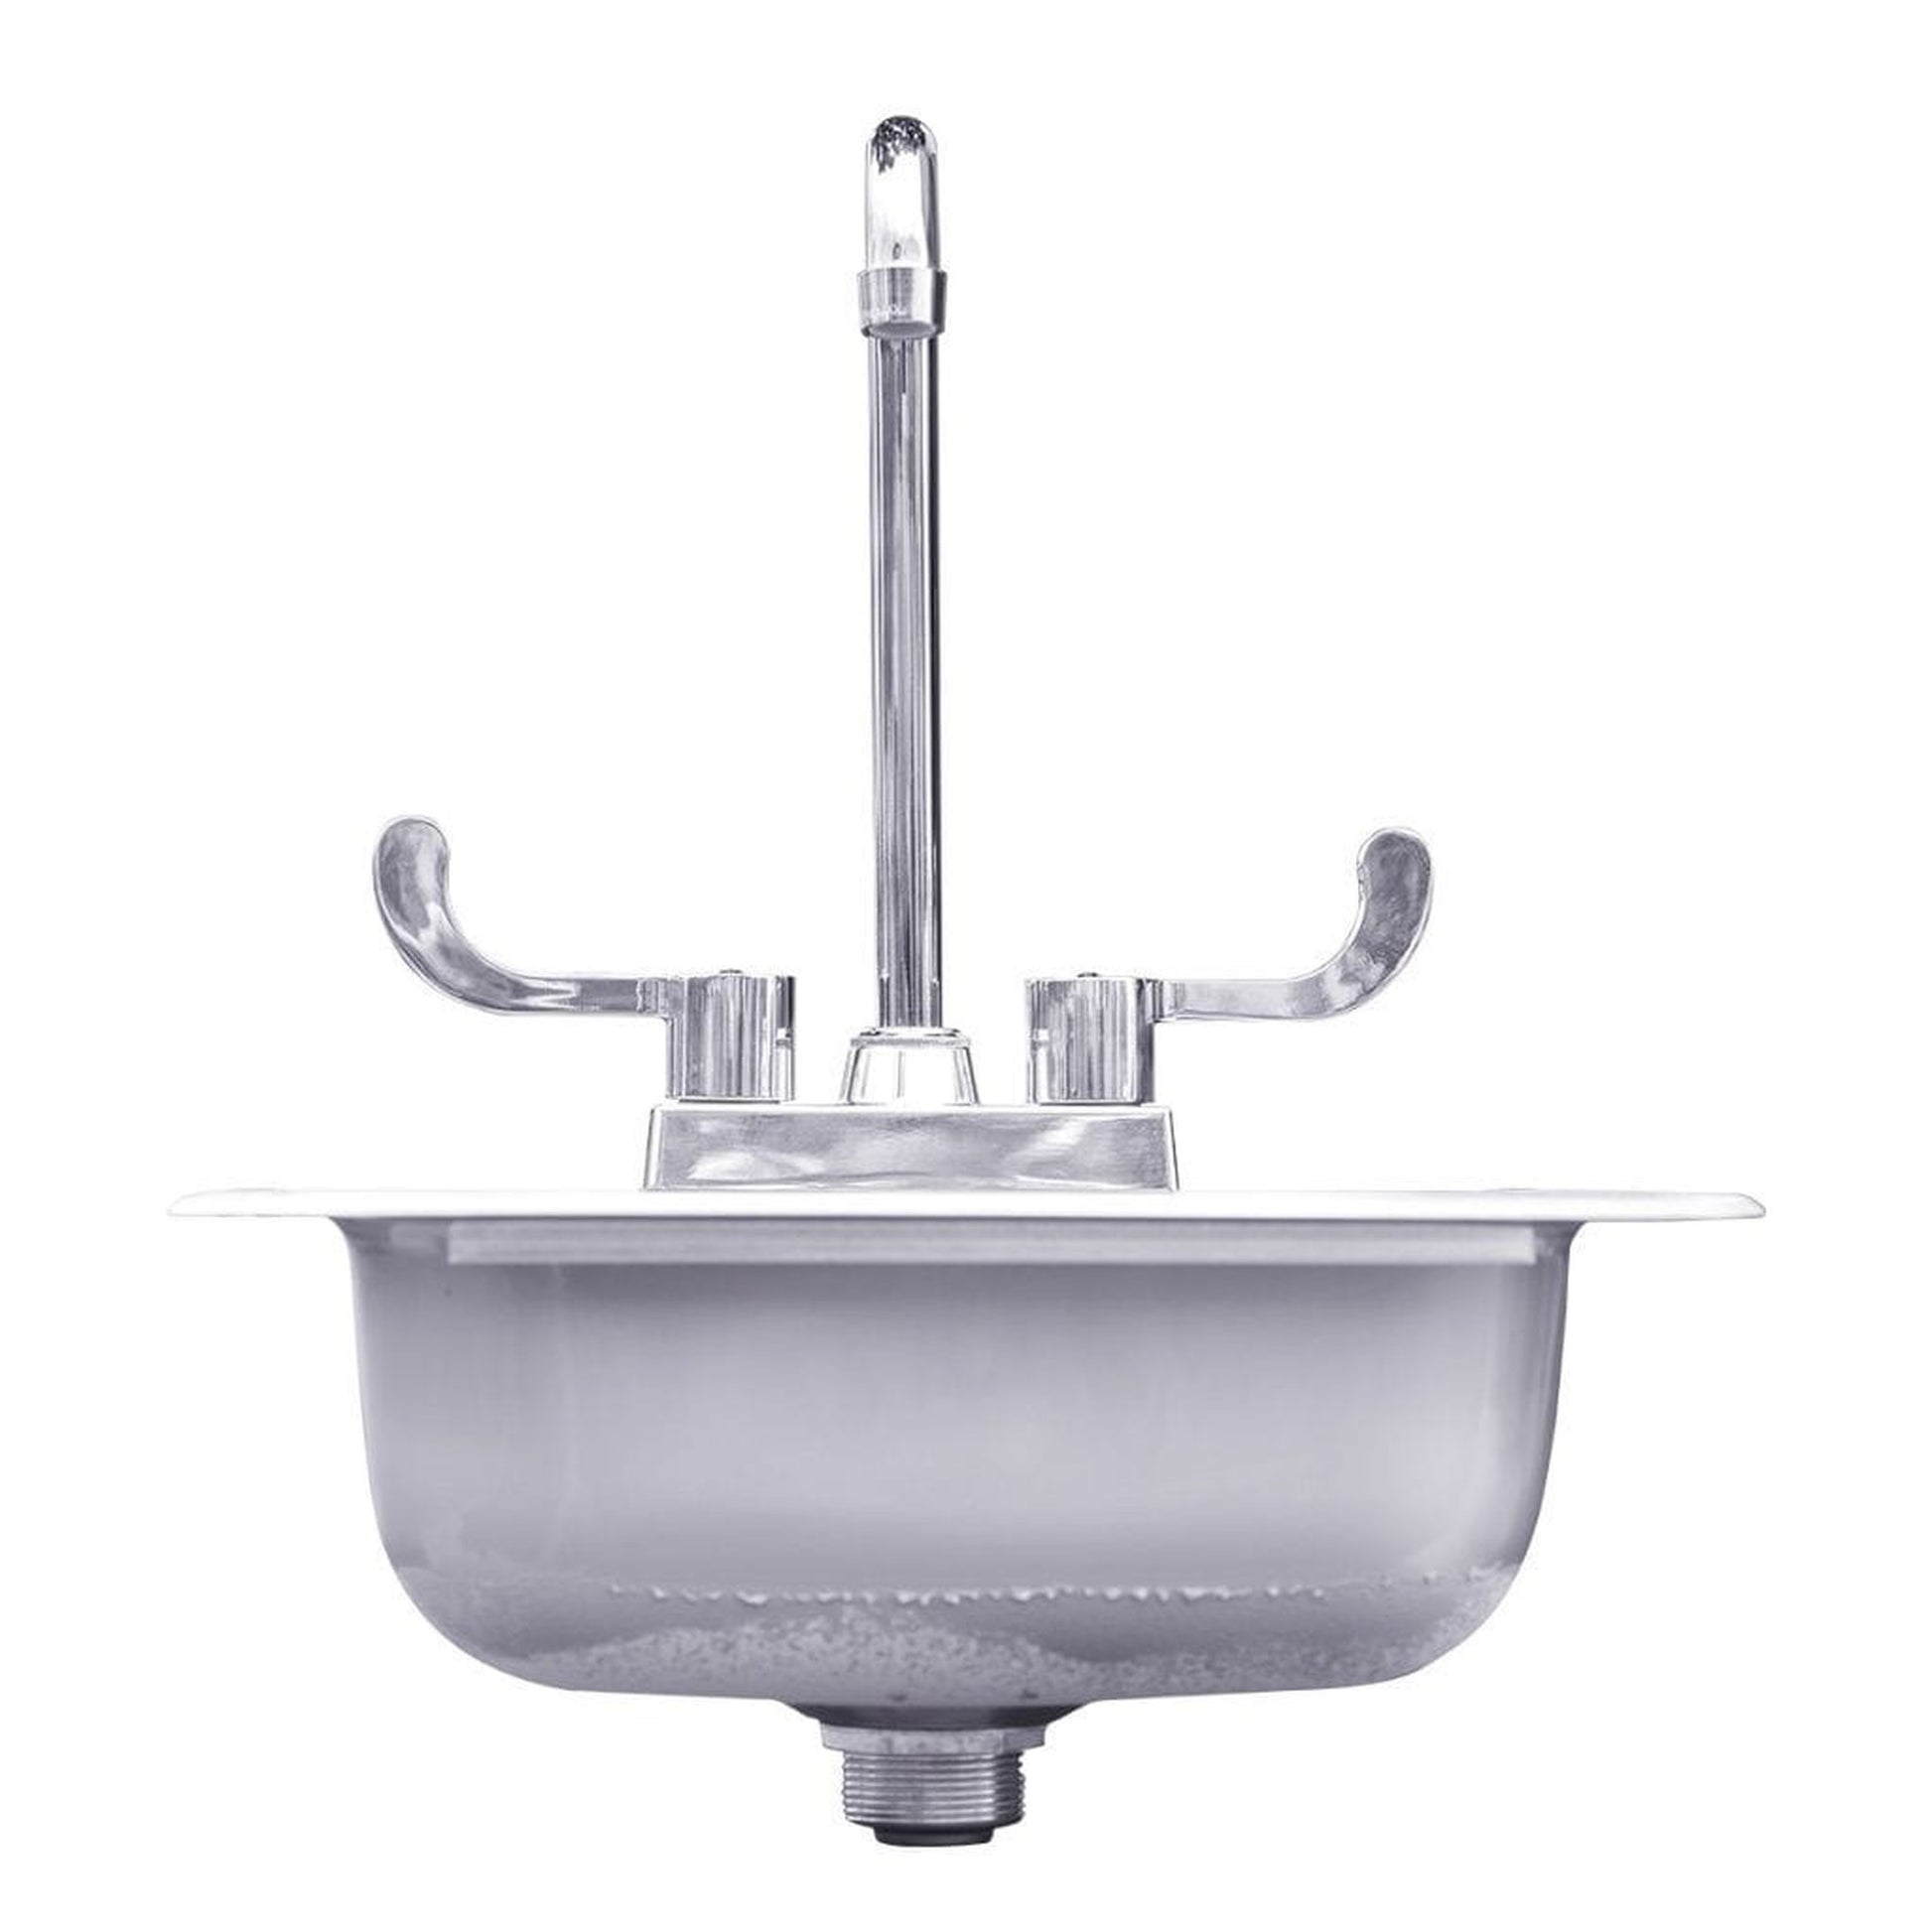 Summerset 15" Stainless Steel Drop-in Sink & Hot/Cold Faucet